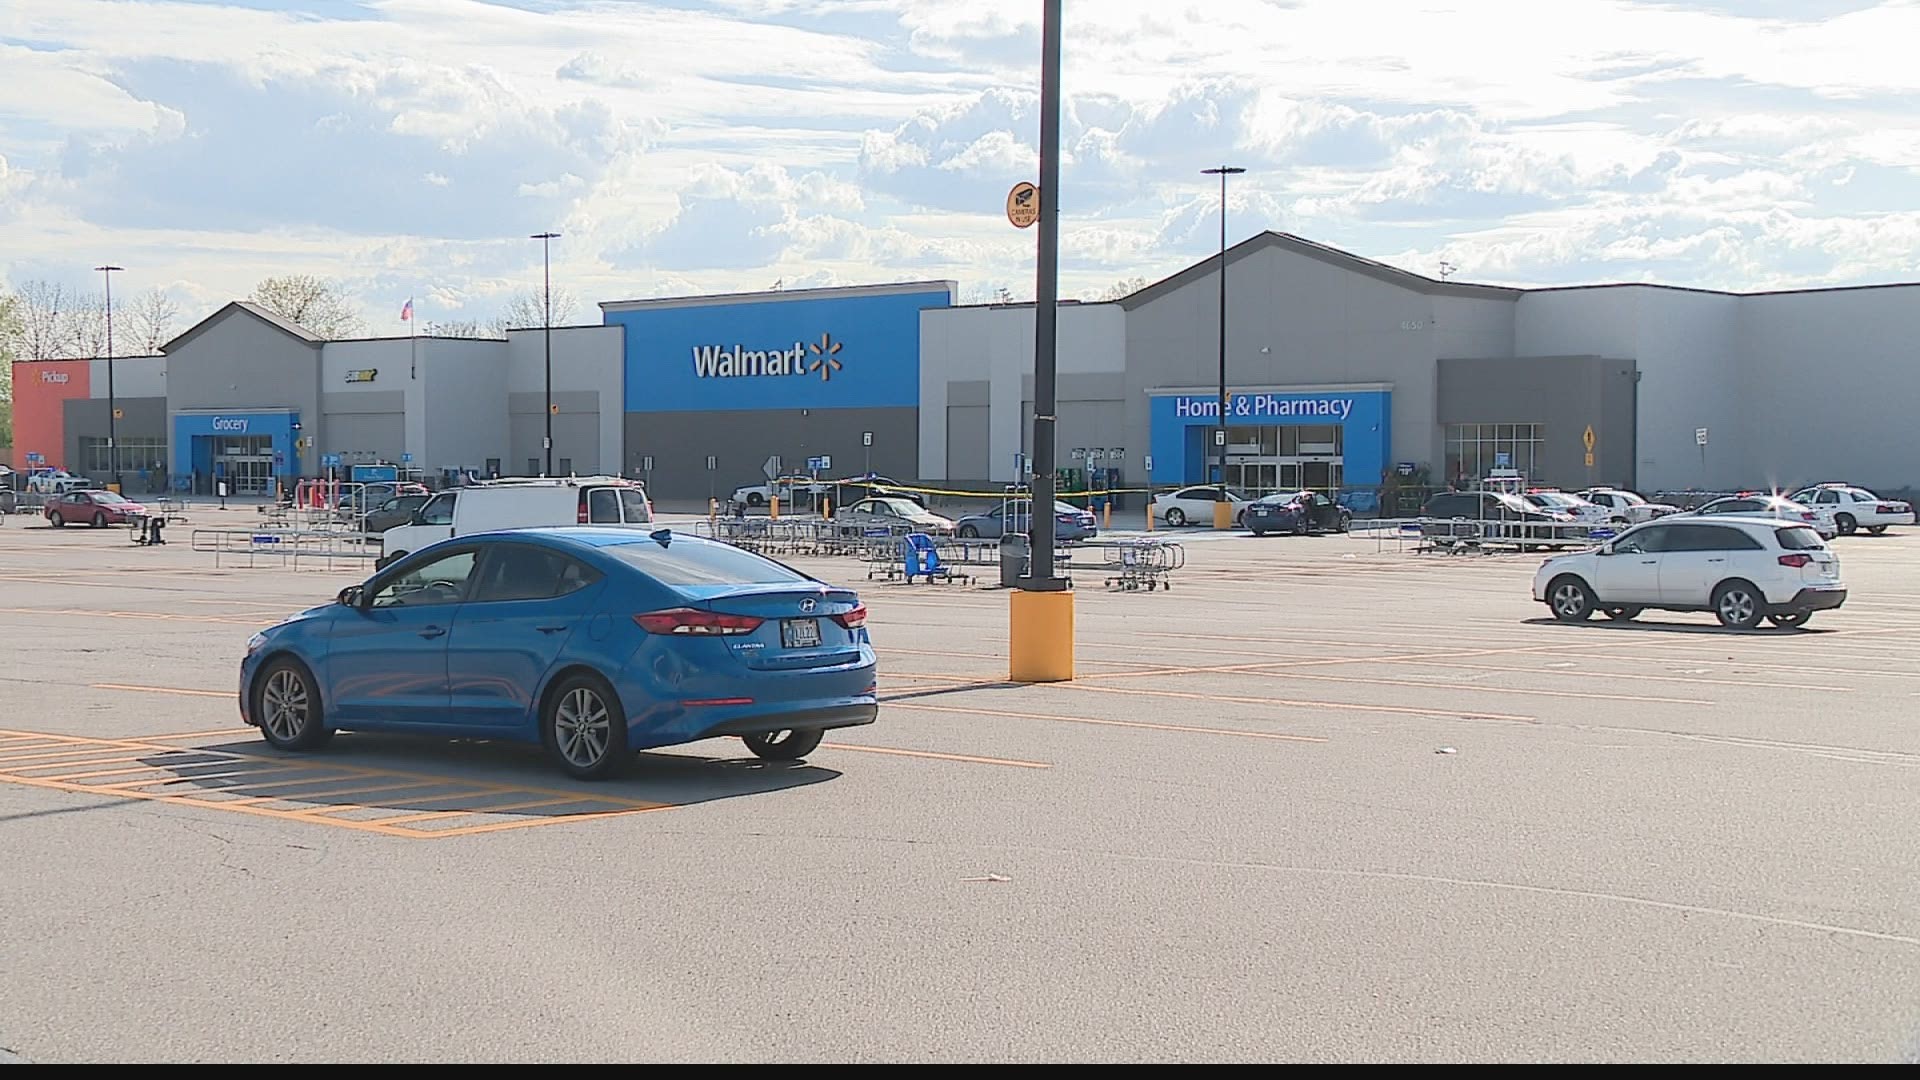 Metro police were called to the Walmart in Beech Grove Saturday after shots were fired inside the store. No reports of injuries.